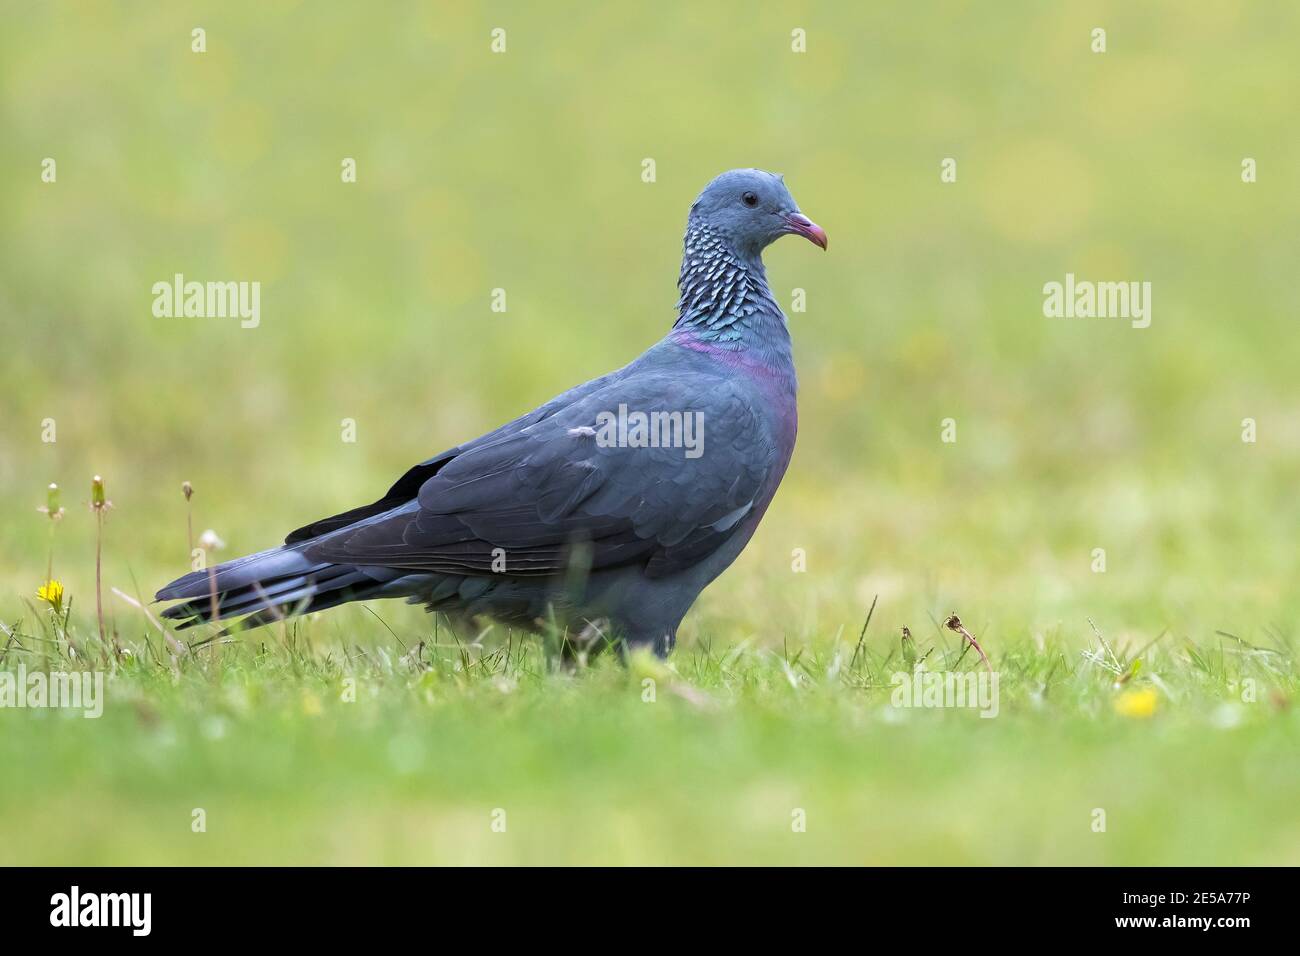 Trocaz pigeon, Madeira laurel pigeon, Long-toed pigeon (Columba trocaz), perched in the grass, Madeira Stock Photo